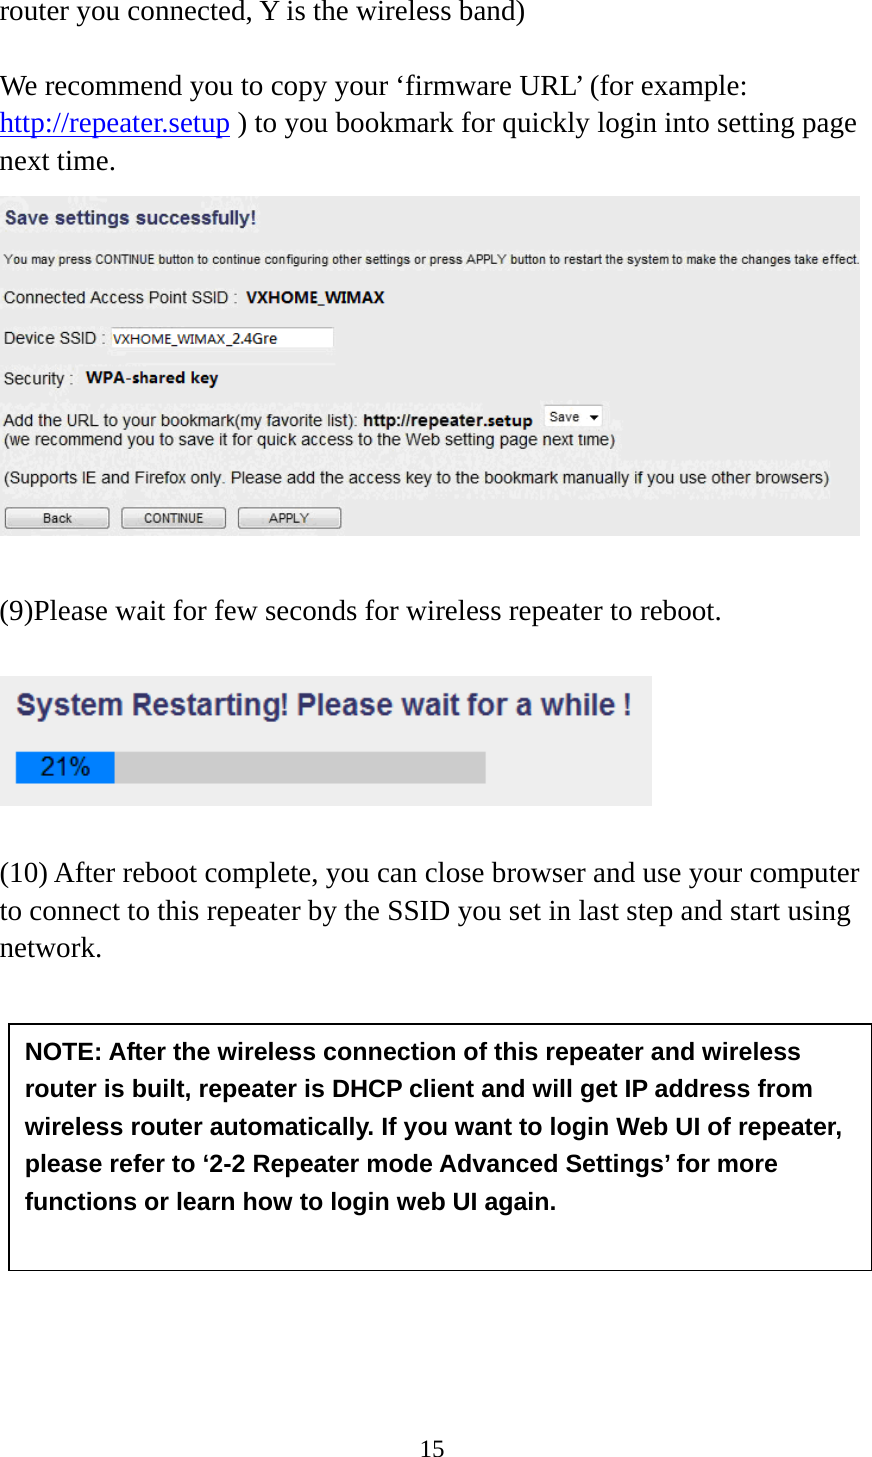 15  router you connected, Y is the wireless band)    We recommend you to copy your ‘firmware URL’ (for example: http://repeater.setup ) to you bookmark for quickly login into setting page next time.   (9)Please wait for few seconds for wireless repeater to reboot.      (10) After reboot complete, you can close browser and use your computer to connect to this repeater by the SSID you set in last step and start using network.          NOTE: After the wireless connection of this repeater and wireless router is built, repeater is DHCP client and will get IP address from wireless router automatically. If you want to login Web UI of repeater, please refer to ‘2-2 Repeater mode Advanced Settings’ for more functions or learn how to login web UI again.  